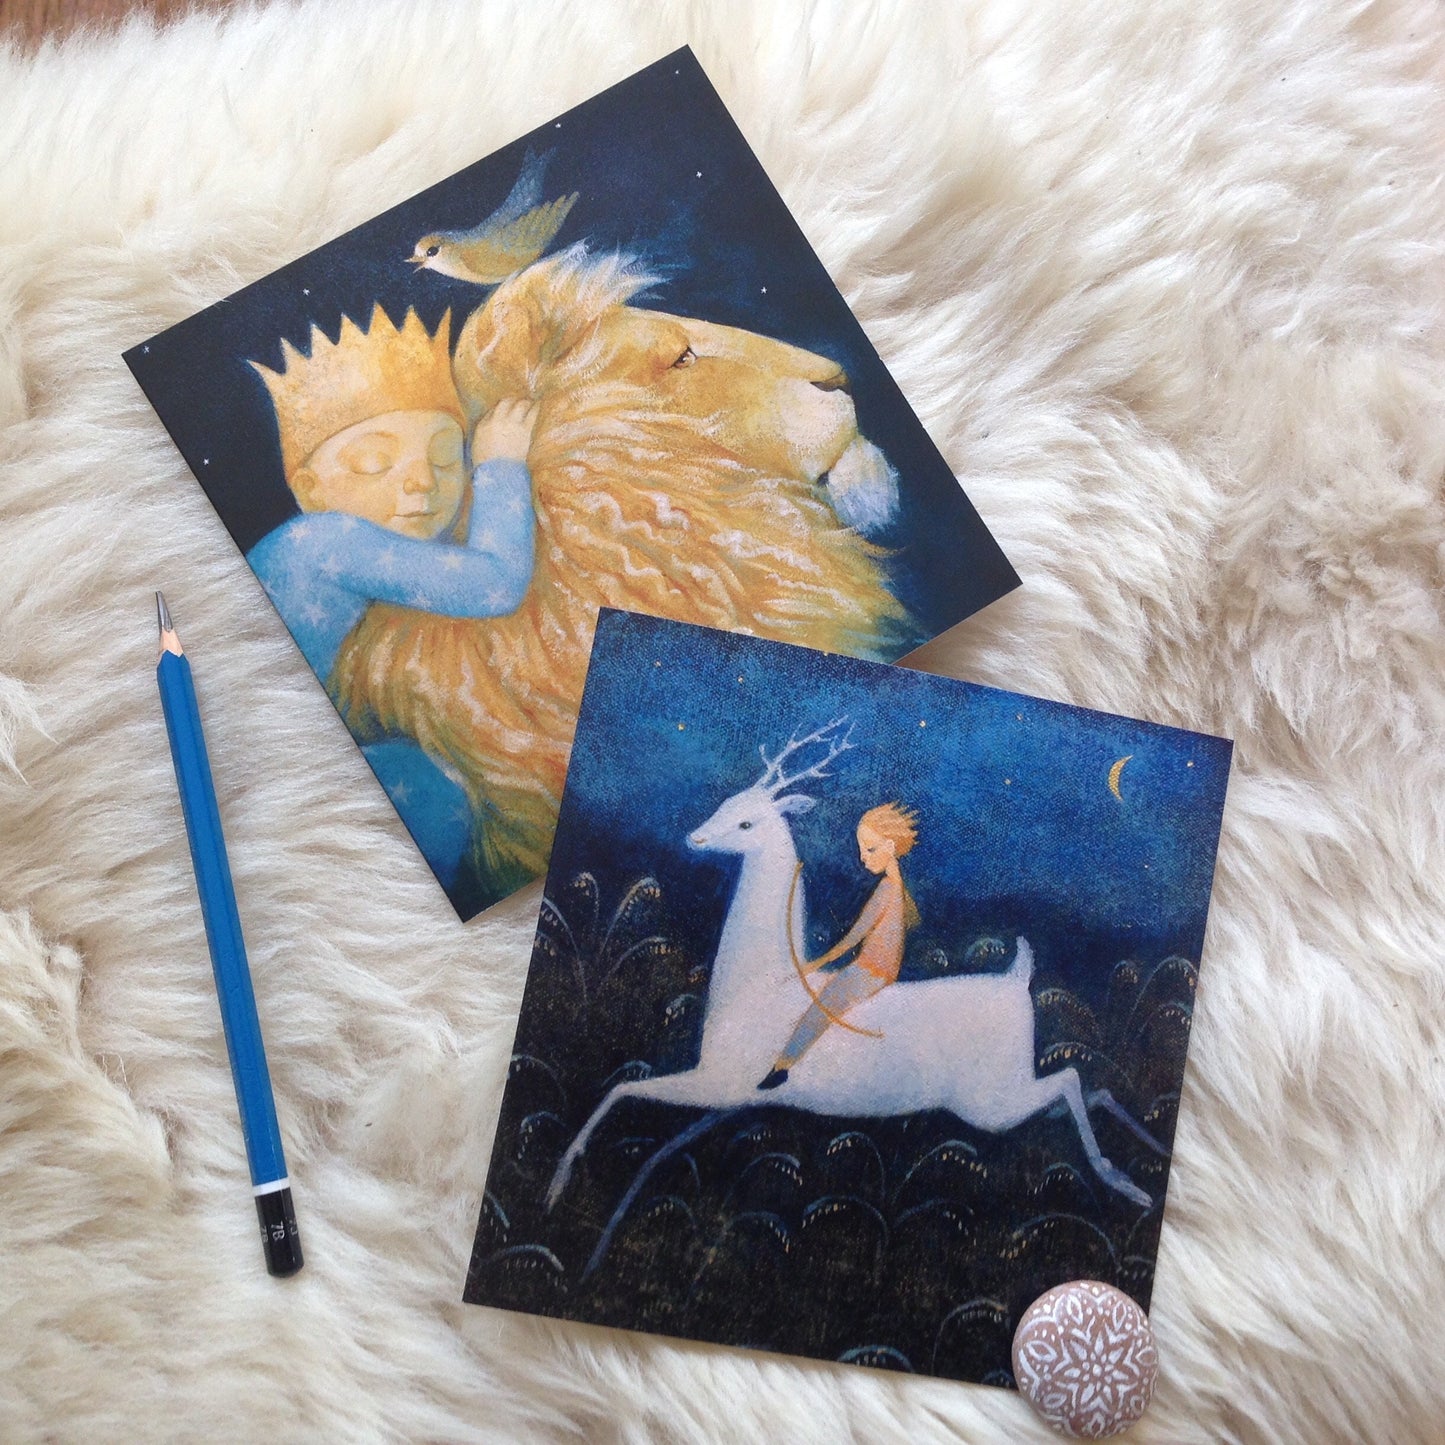 "Lion, bird" & "Hunter of Dreams" 6 greetings cards - 2 images